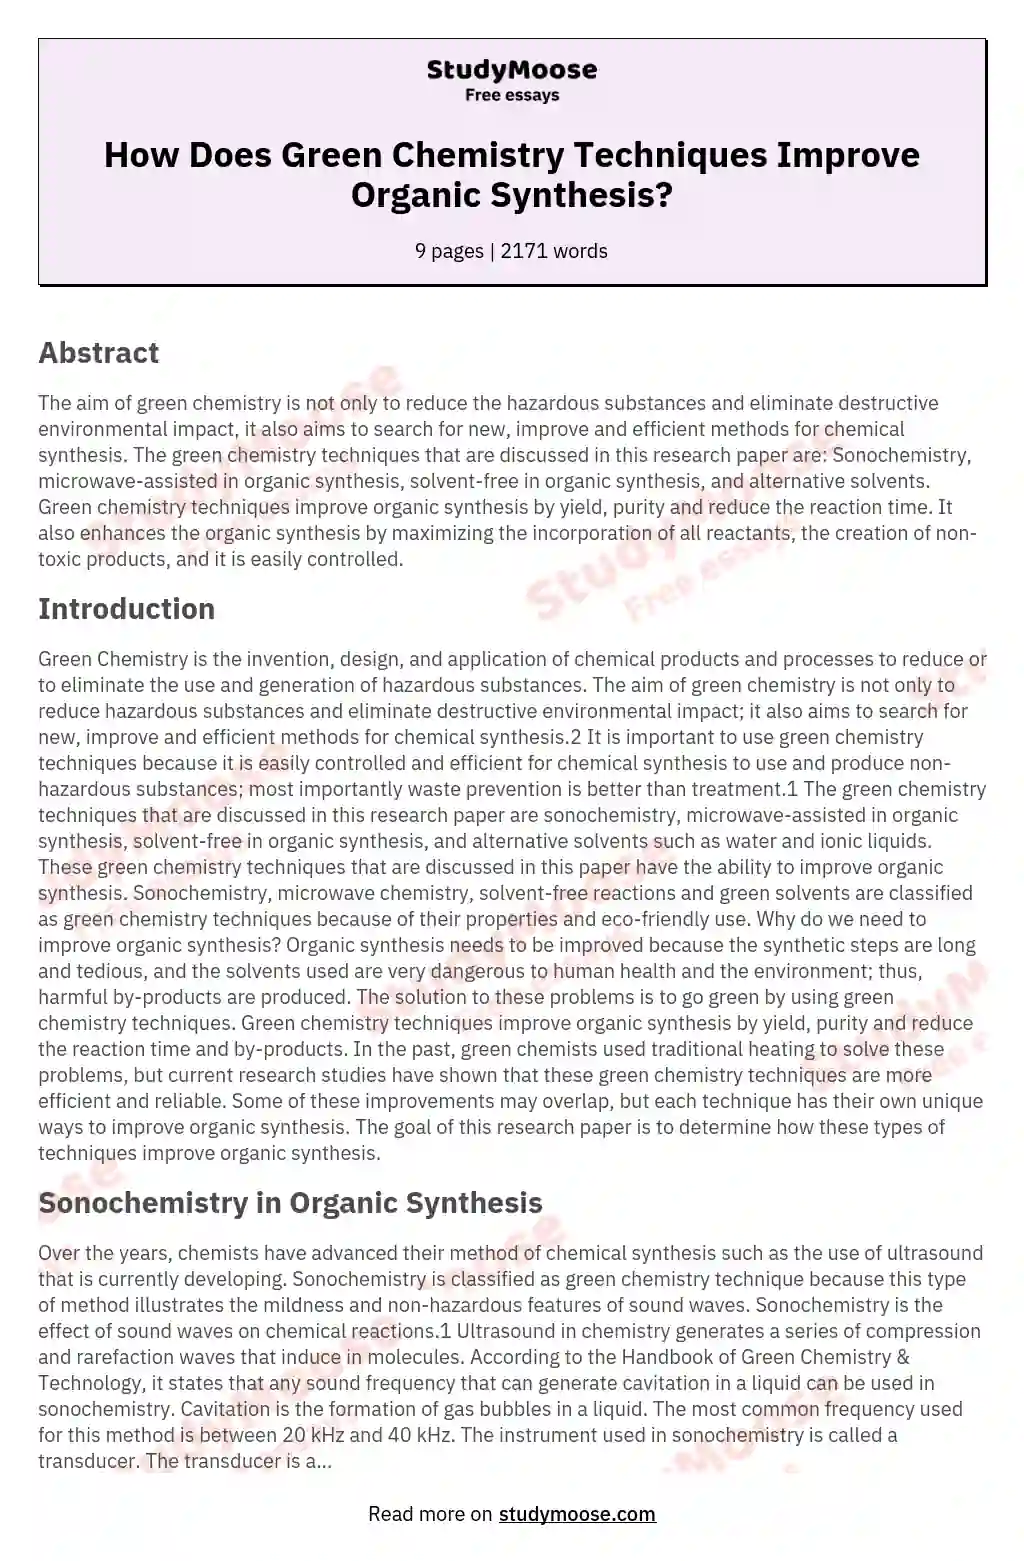 How Does Green Chemistry Techniques Improve Organic Synthesis? essay